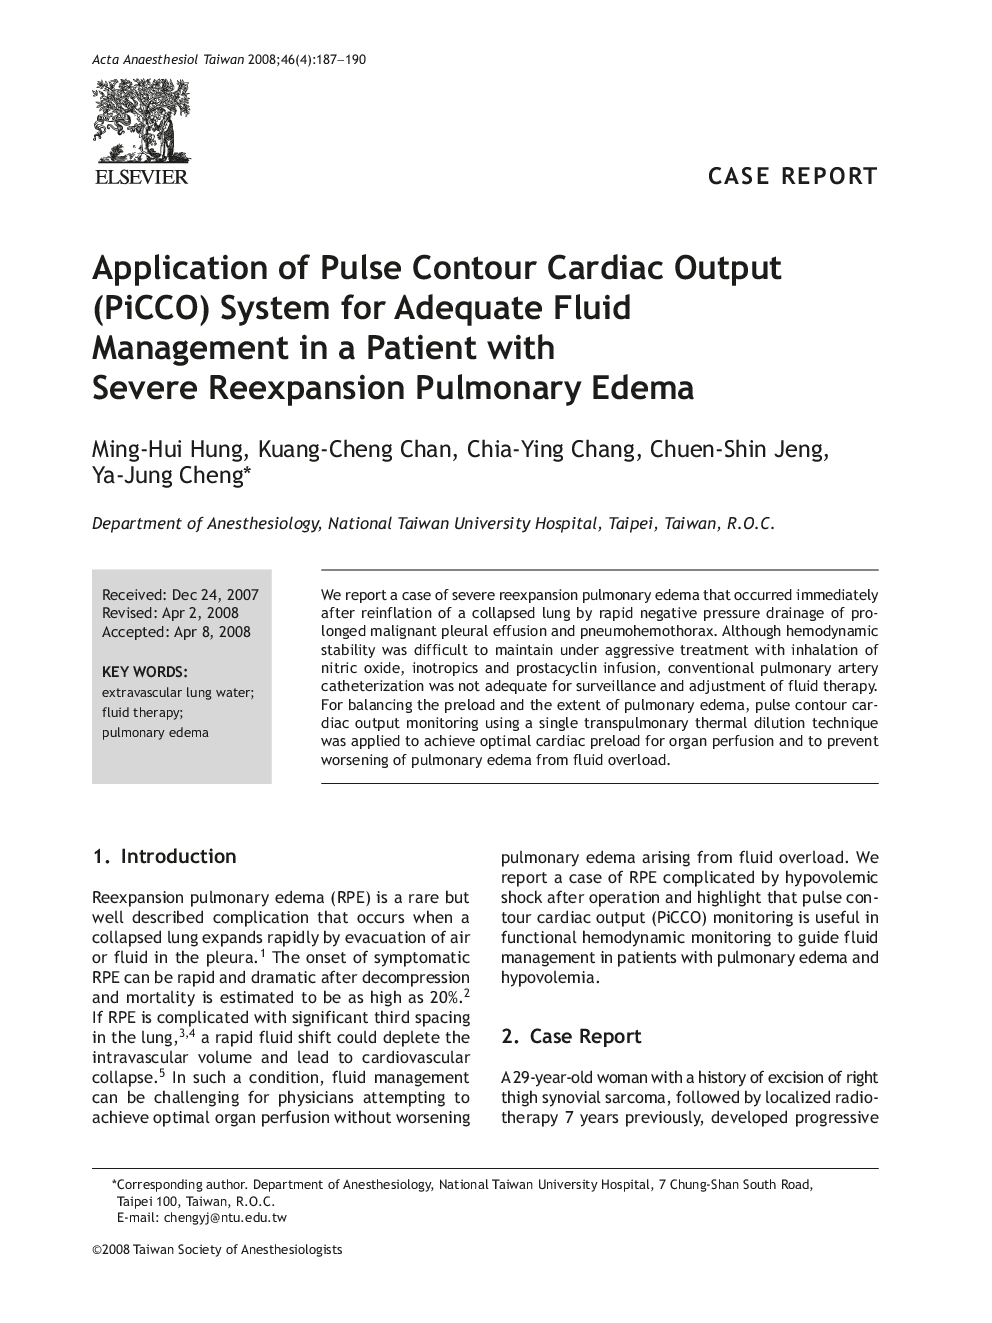 Application of Pulse Contour Cardiac Output (PiCCO) System for Adequate Fluid Management in a Patient with Severe Reexpansion Pulmonary Edema